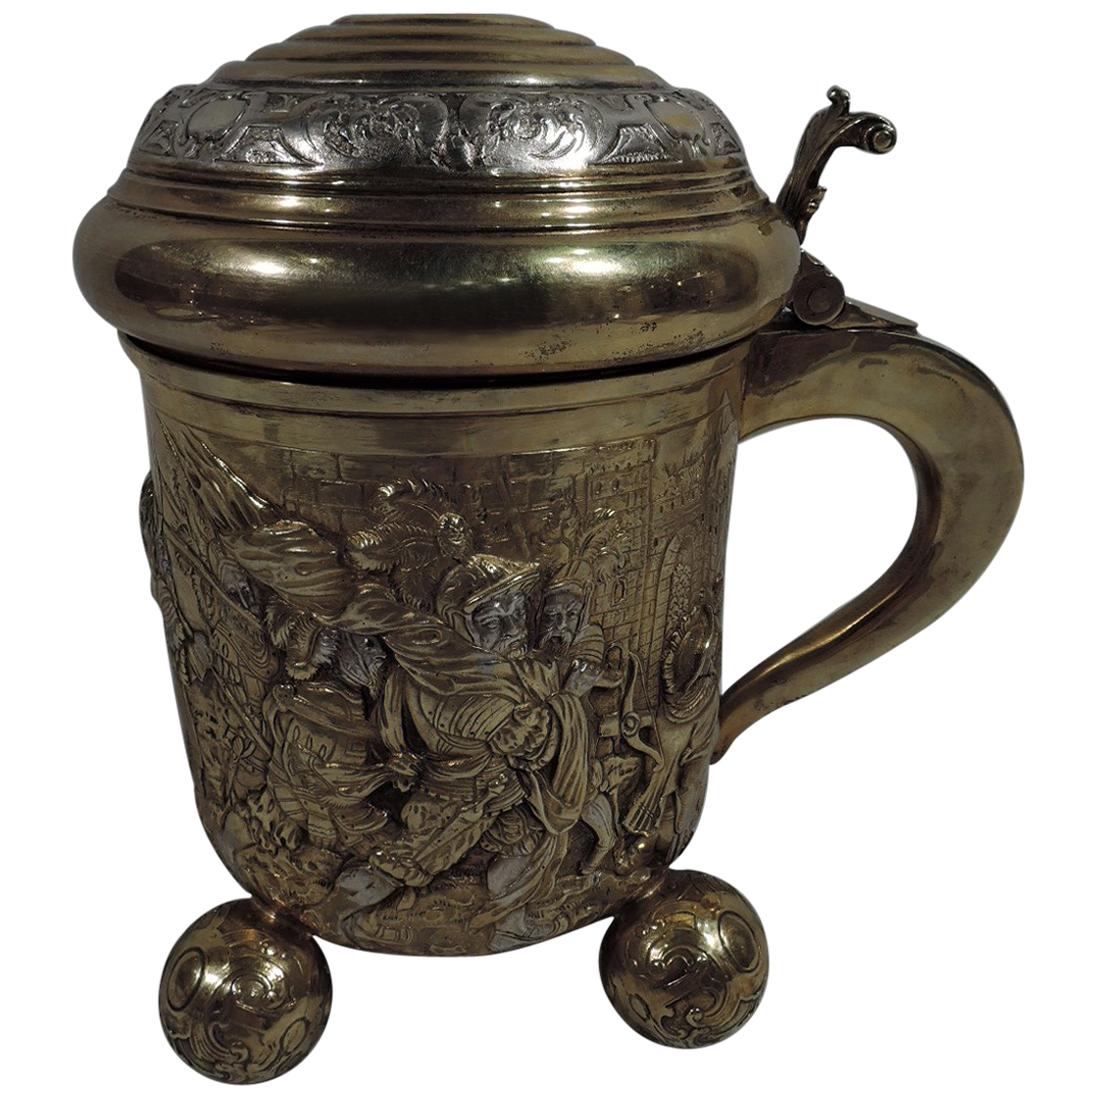 Antique German Gothic Silver Gilt Tankard with Teutonic Frieze